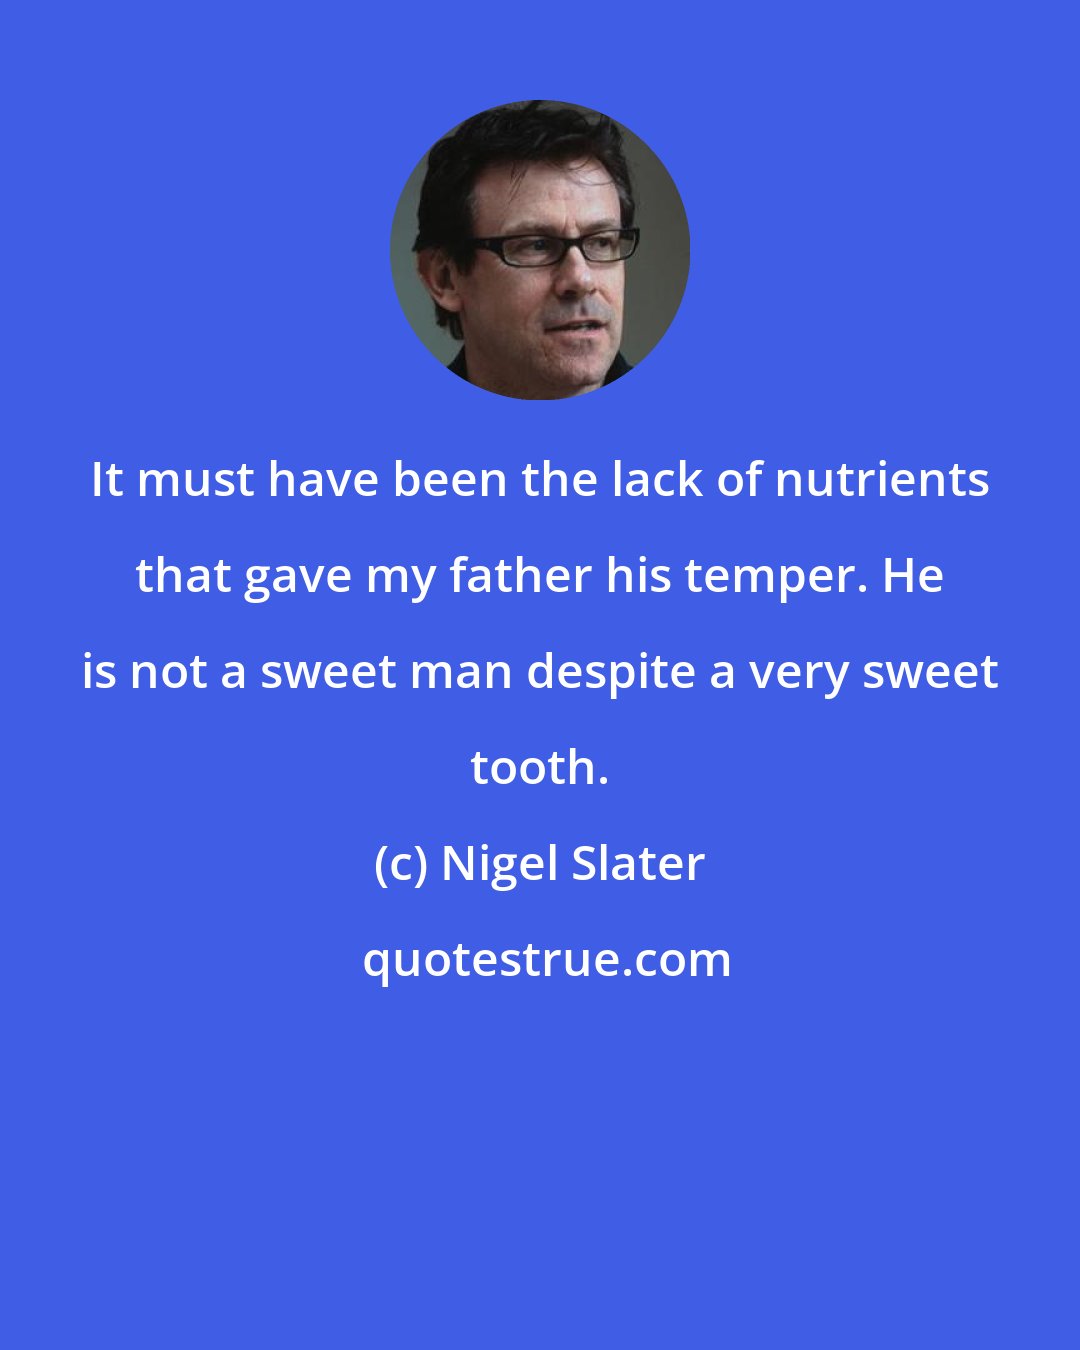 Nigel Slater: It must have been the lack of nutrients that gave my father his temper. He is not a sweet man despite a very sweet tooth.